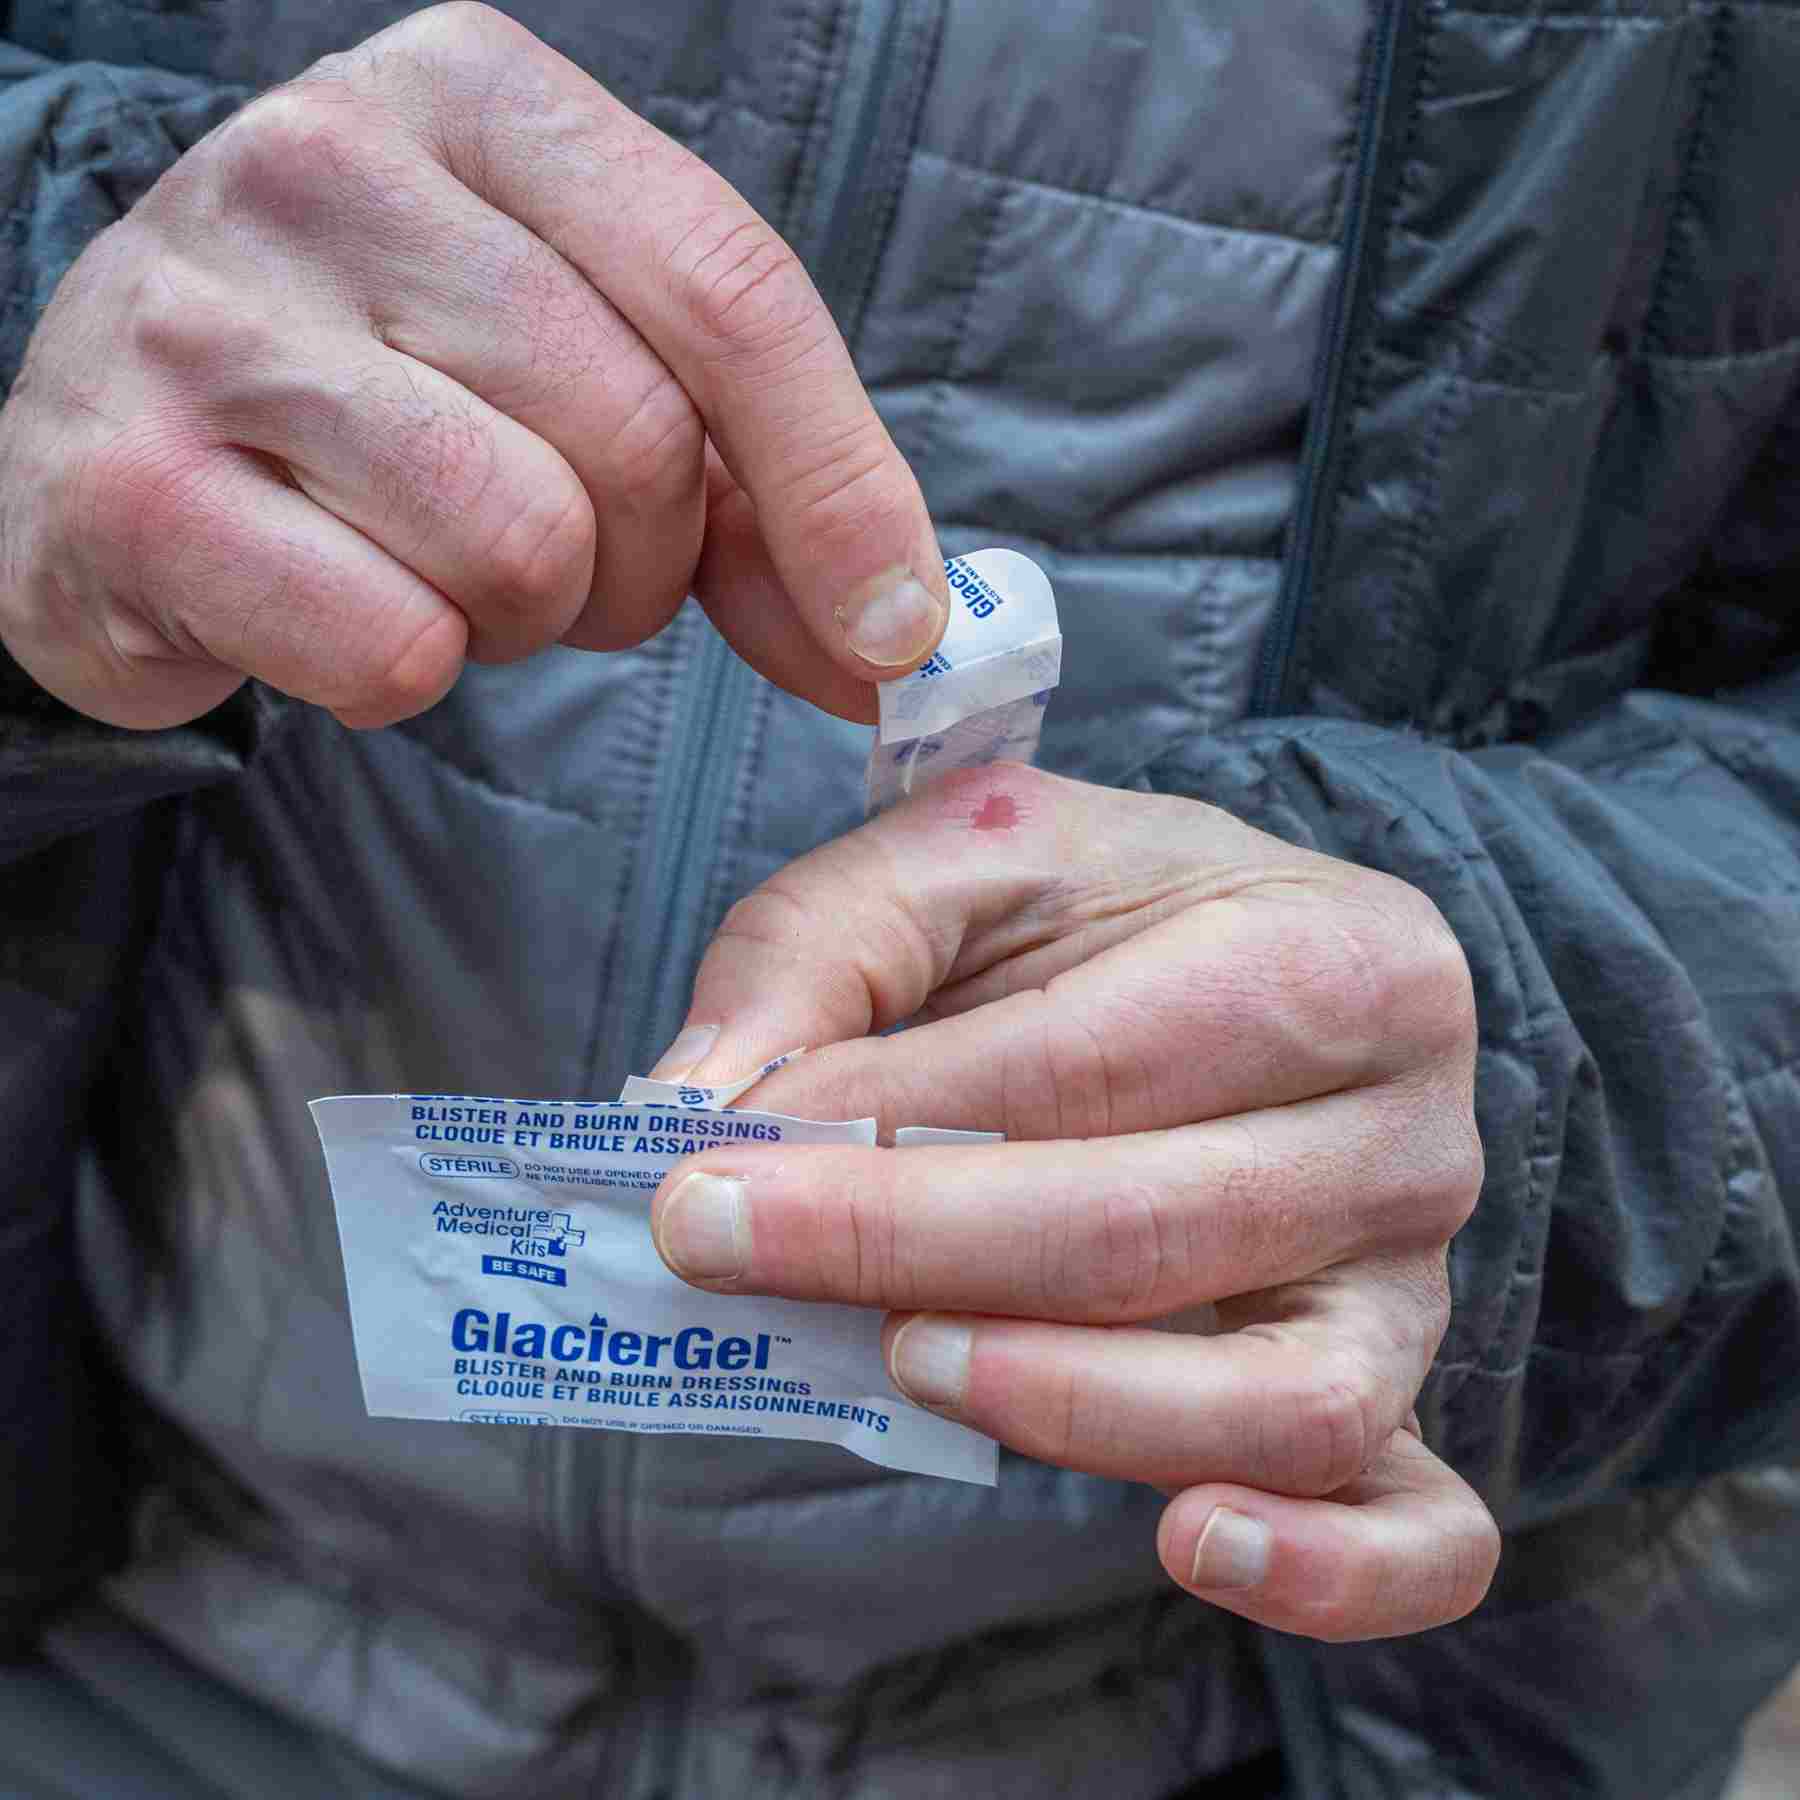 GlacierGel Blister and Burn Dressing applying to a blister on a hand